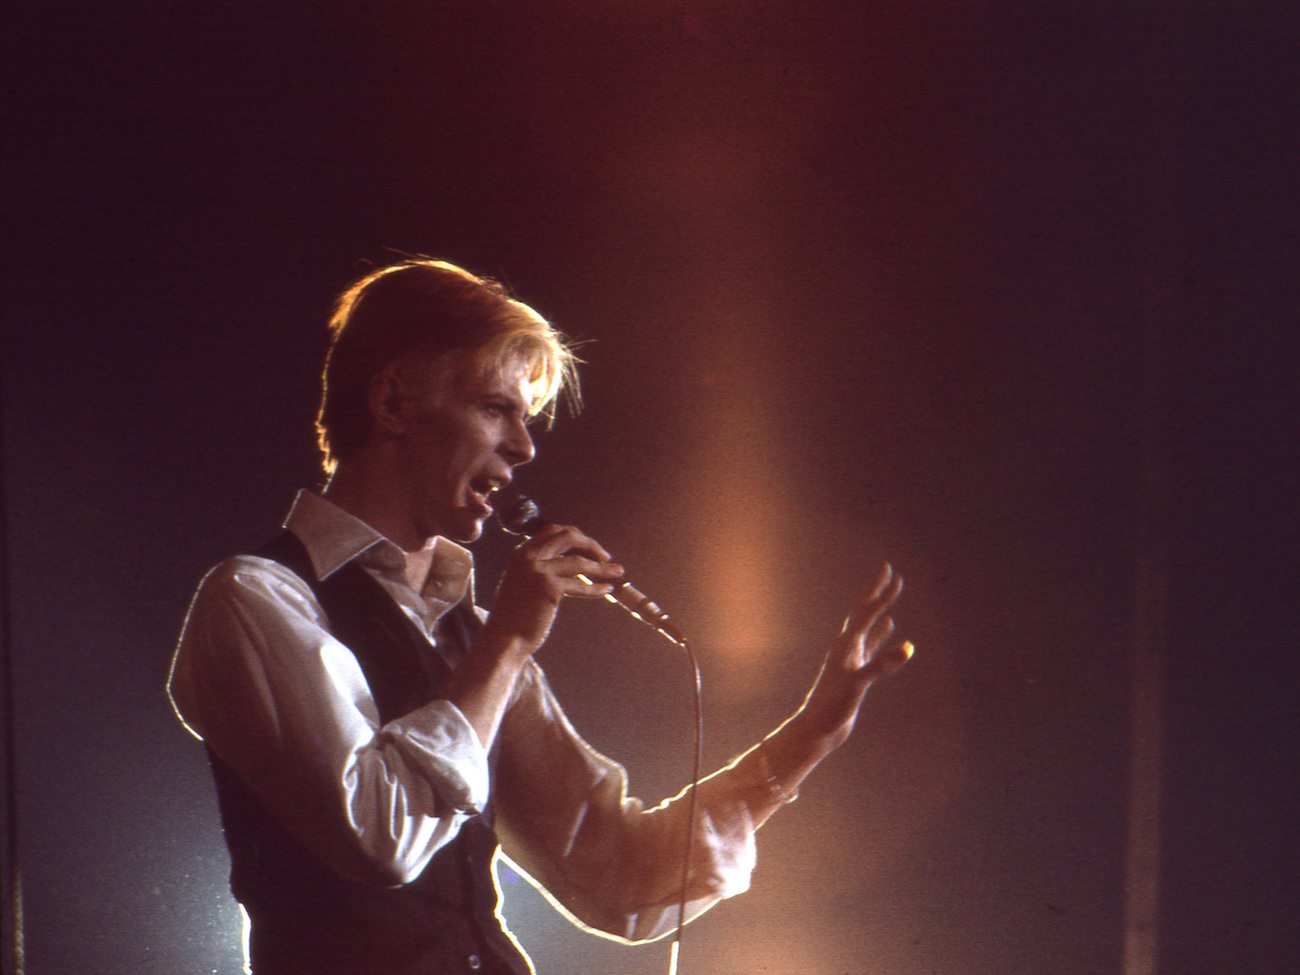 David Bowie performing as the Thin White Duke in 1976.